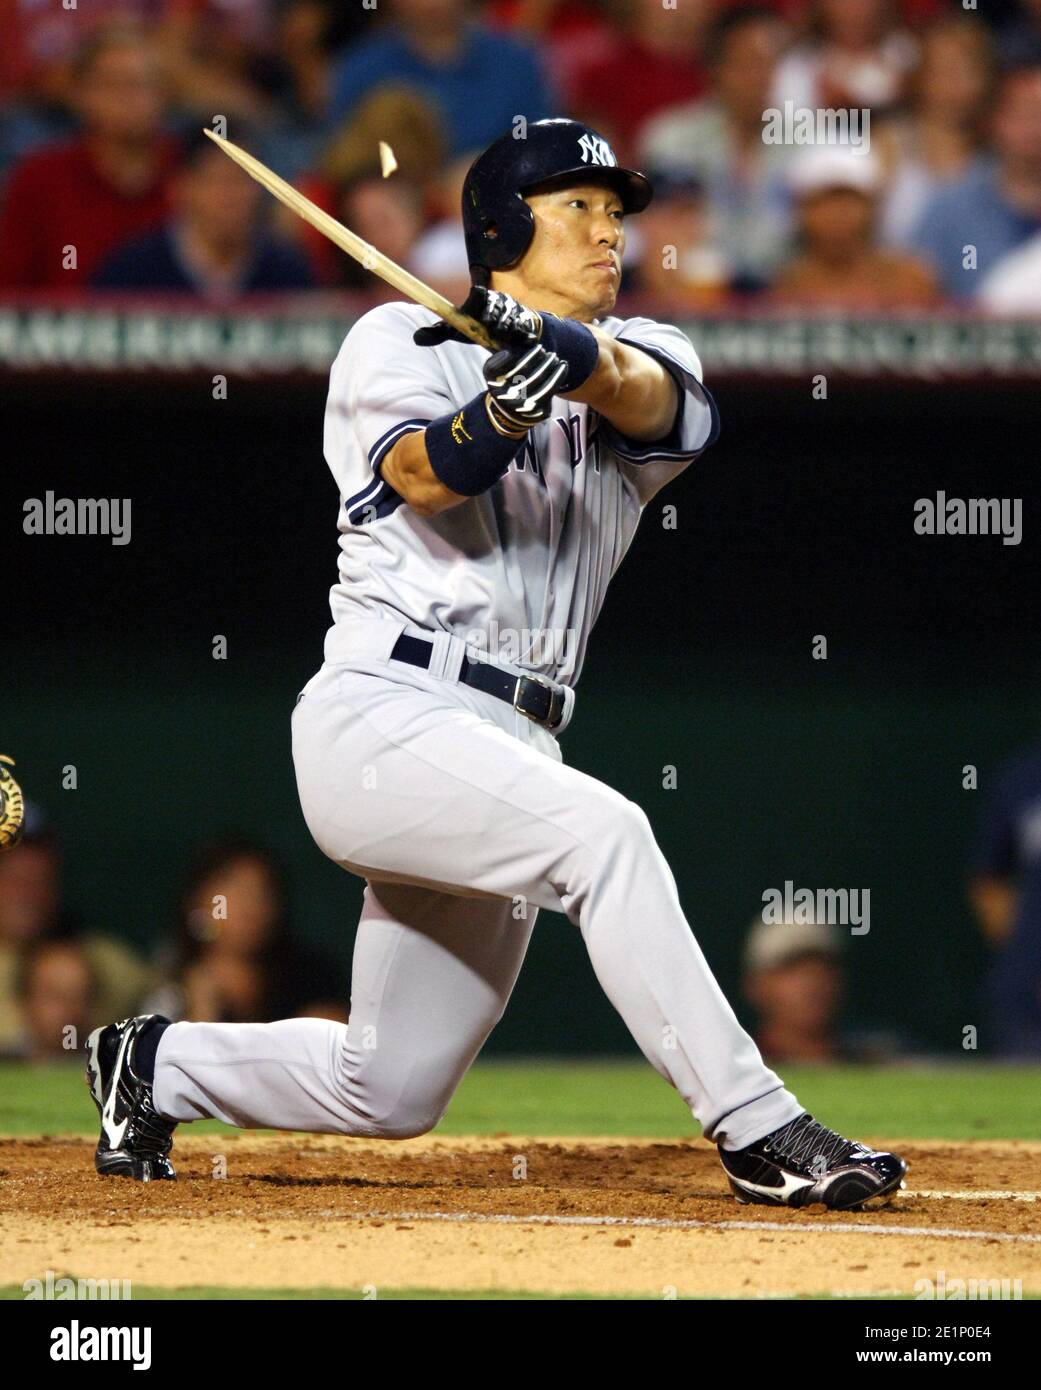 Hideki Matsui of the New York Yankees shatters bats during 8-6 loss to the Los Angeles Angels of Anaheim at Angel Stadium in Anaheim, Calif. on Saturd Stock Photo